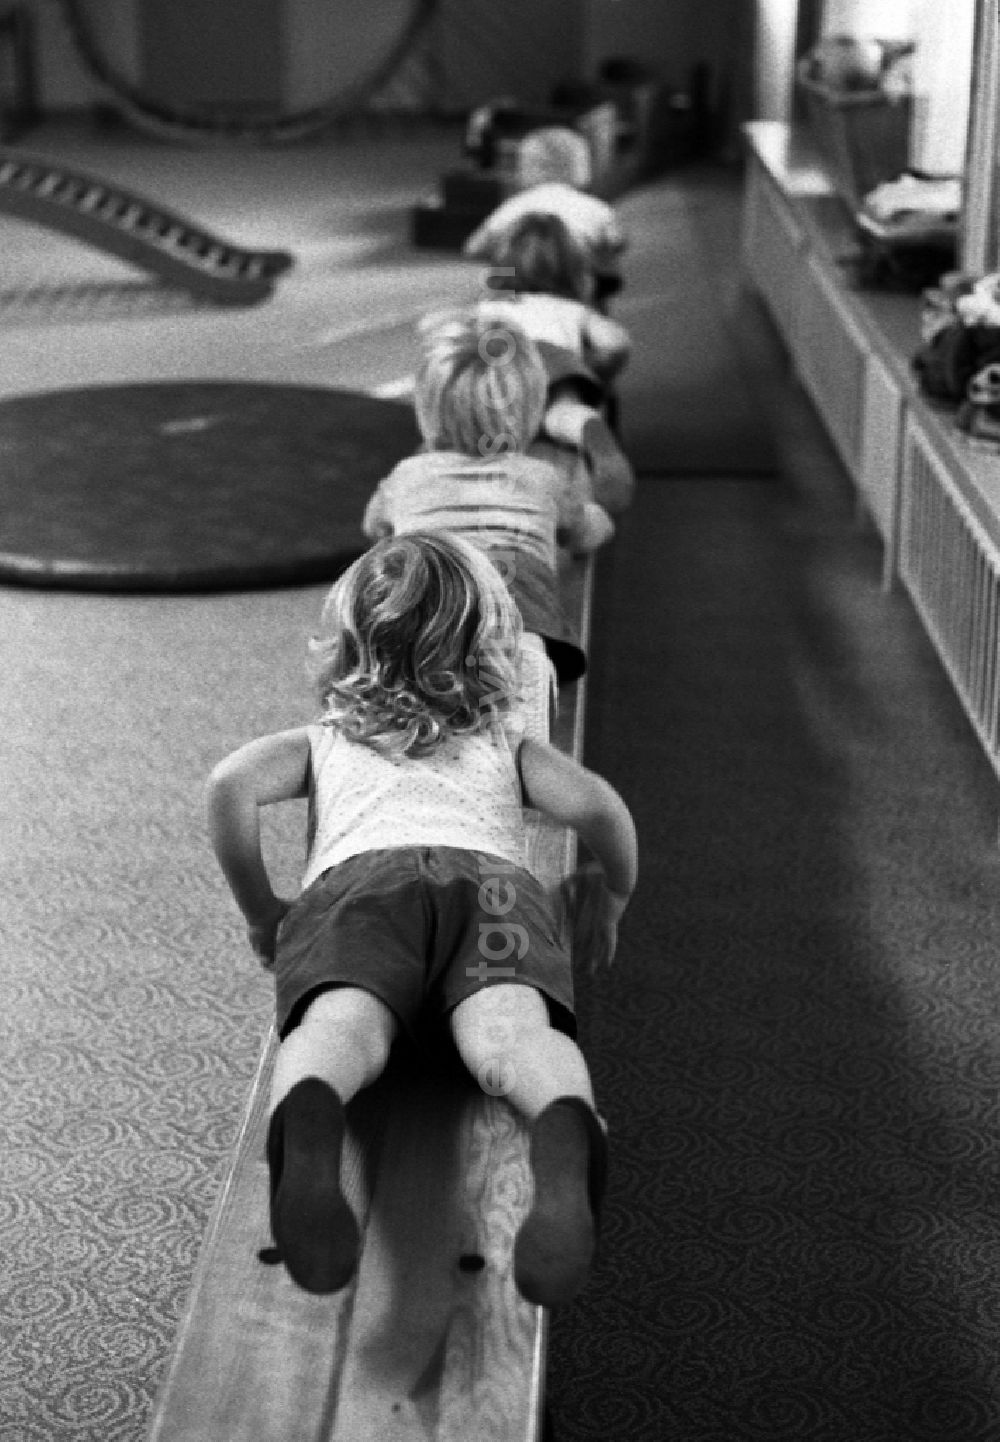 GDR image archive: Berlin - Games and fun with toddlers in kindergarten in physical education in a gym in Berlin Eastberlin on the territory of the former GDR, German Democratic Republic